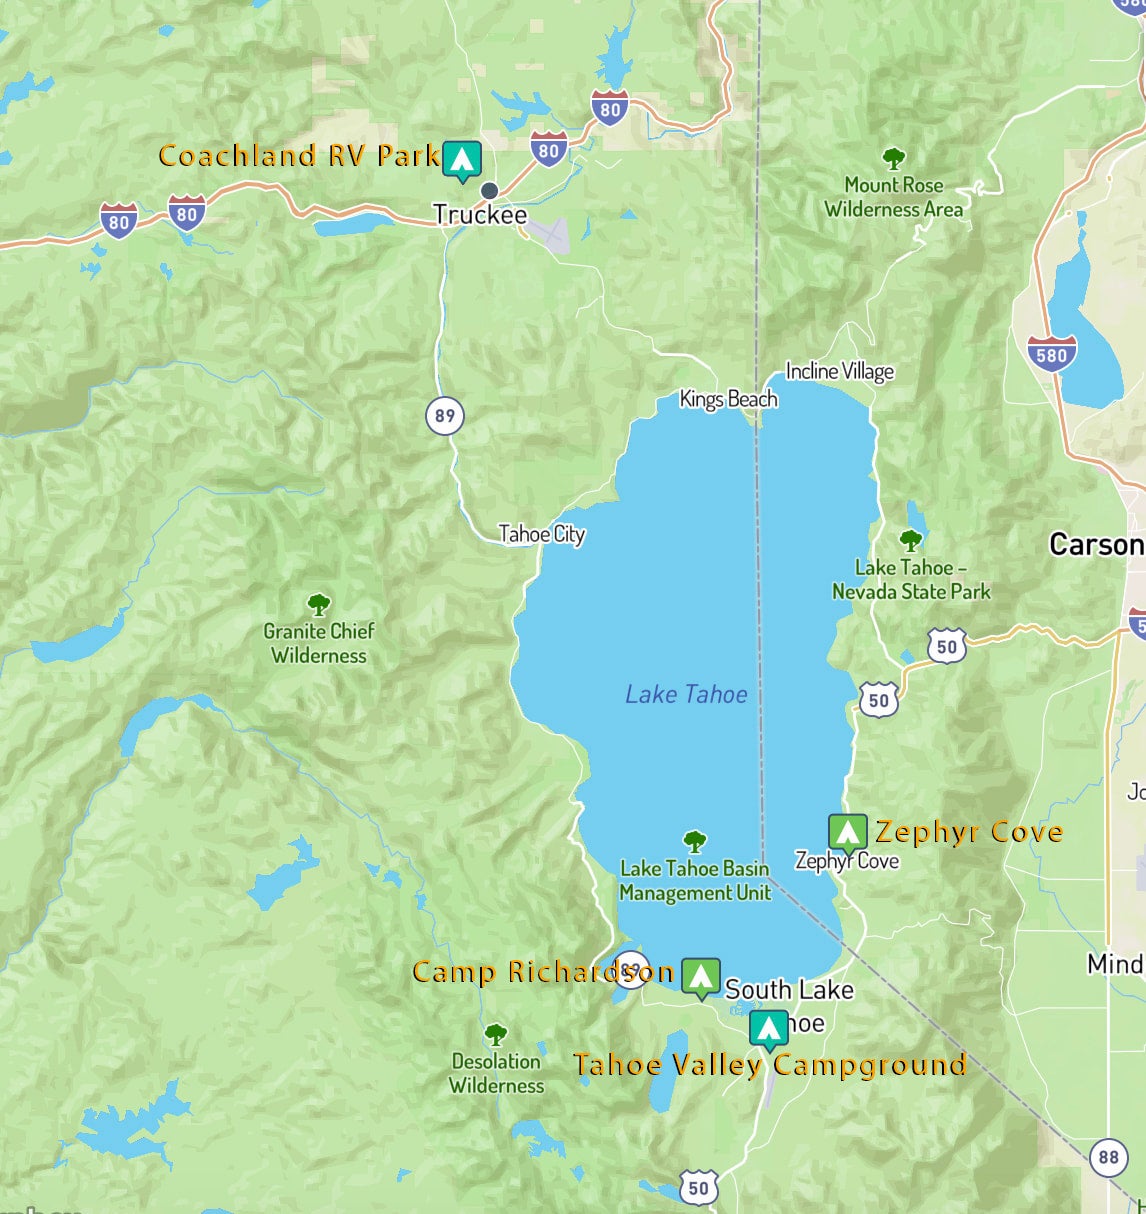 Map of Lake Tahoe showing the locations of the four campgrounds listed.